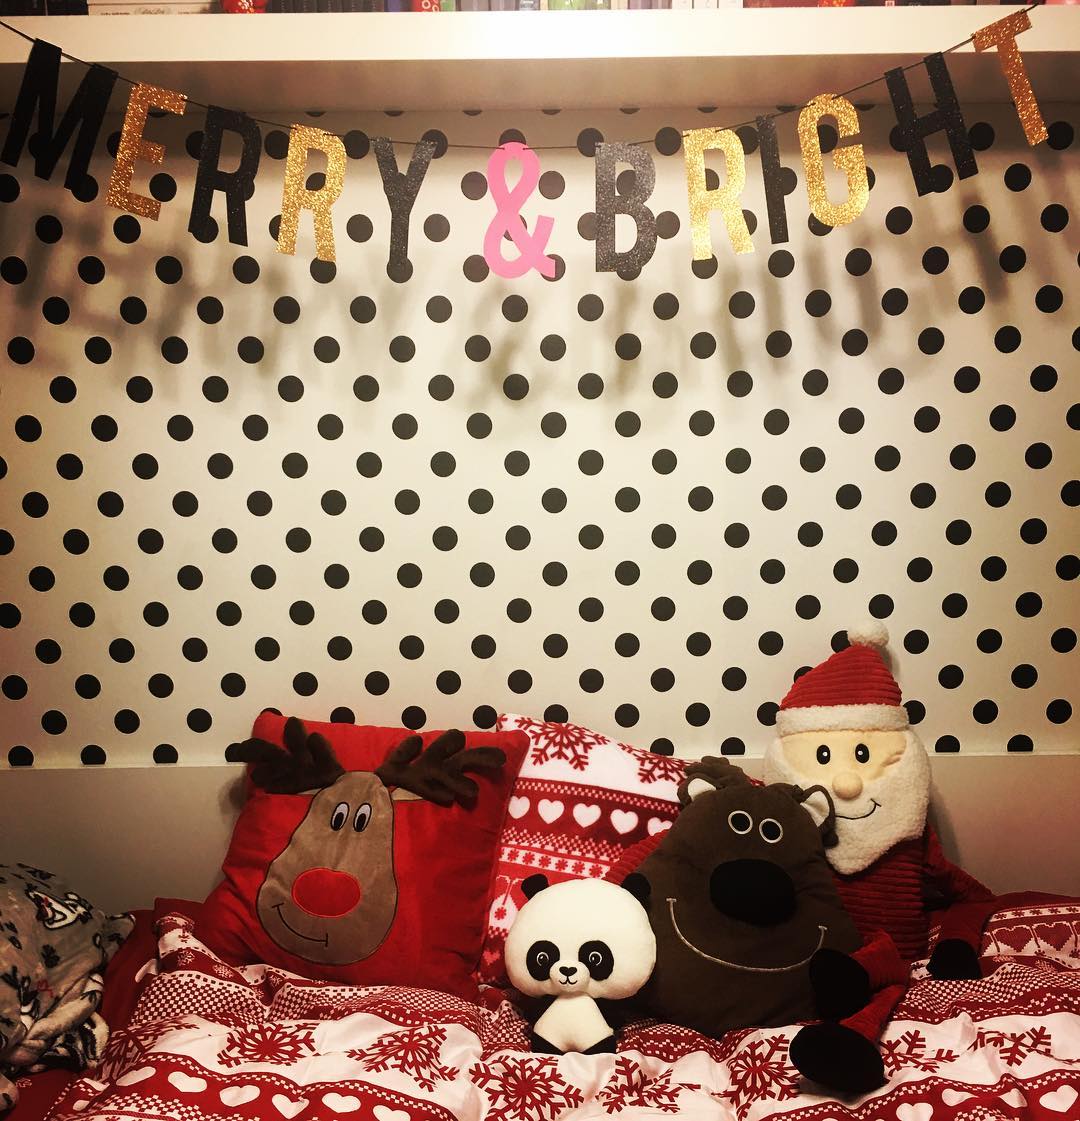 Outstanding Christmas Decor With Soft Toys